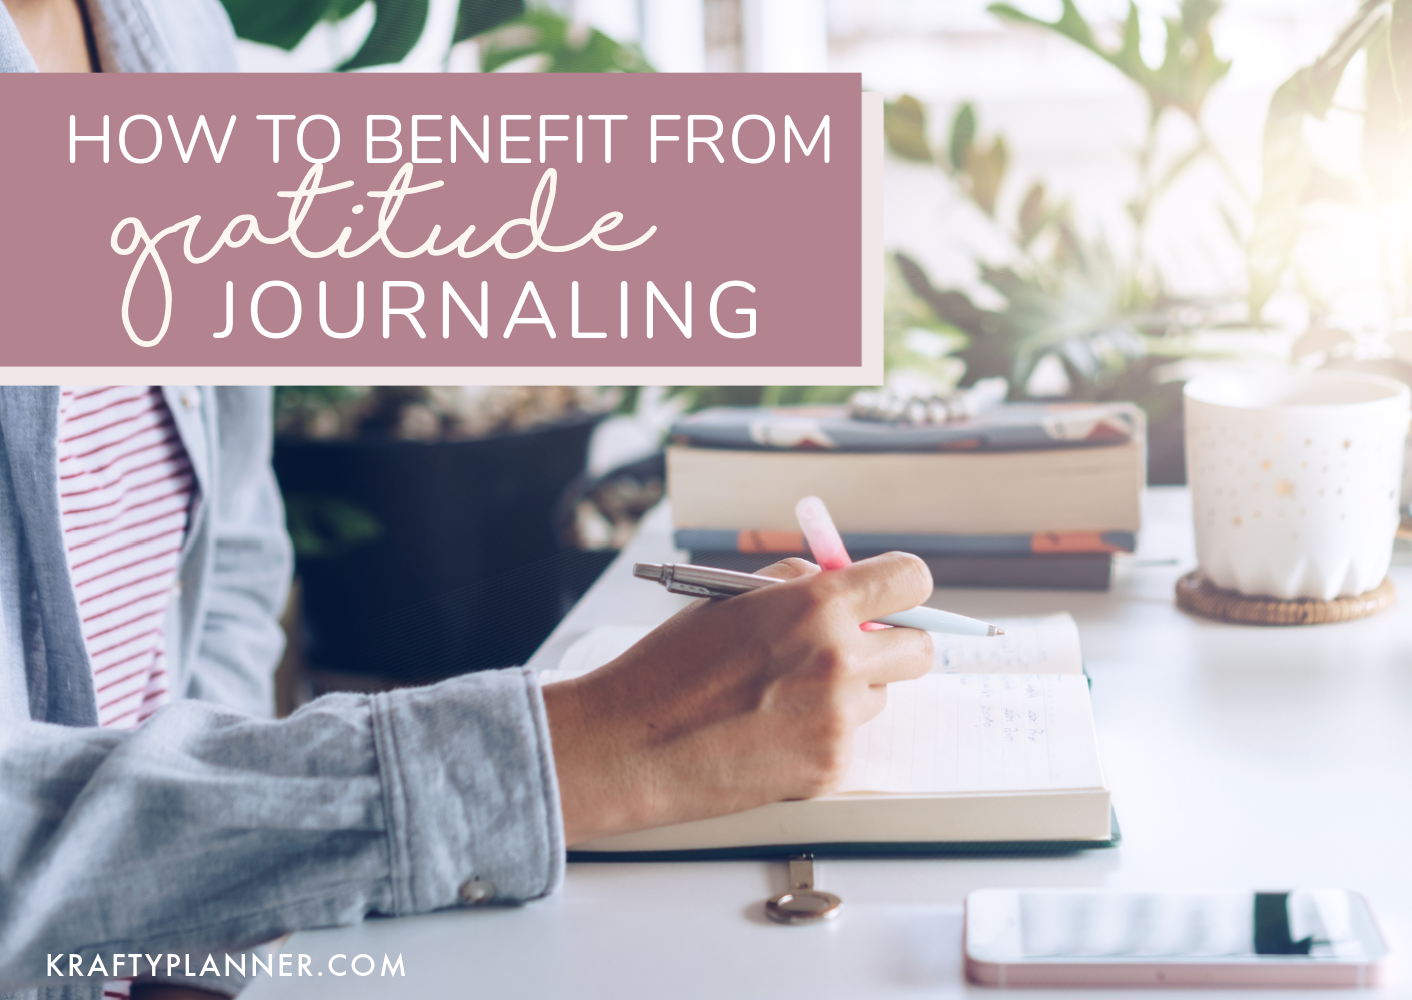 How to Benefit From Gratitude Journaling